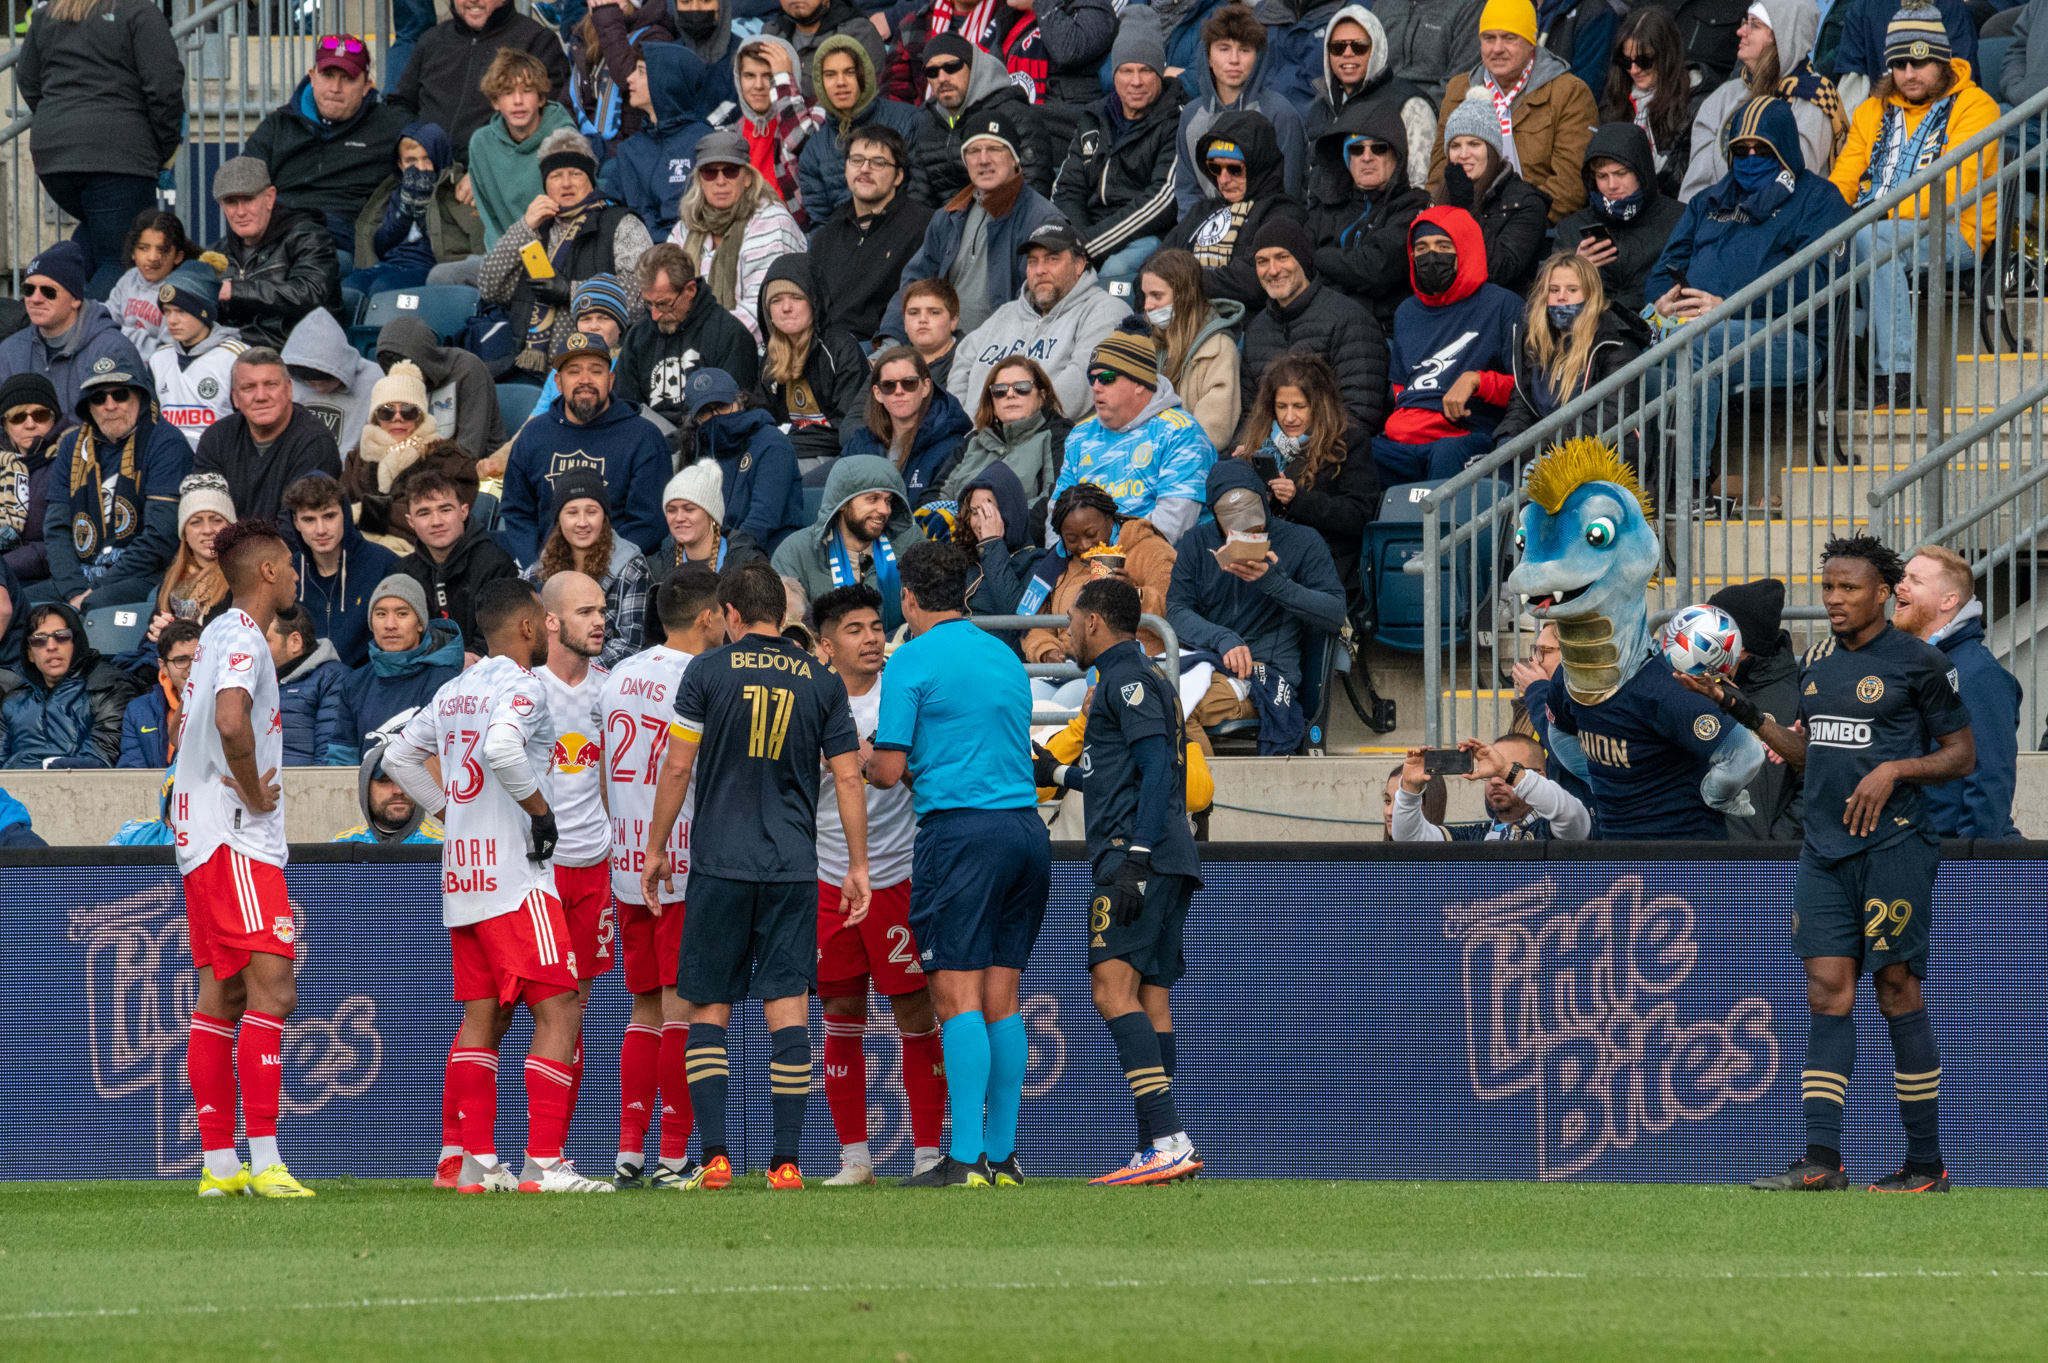 Why isn't New York Red Bulls and Philadelphia Union a big rivalry?